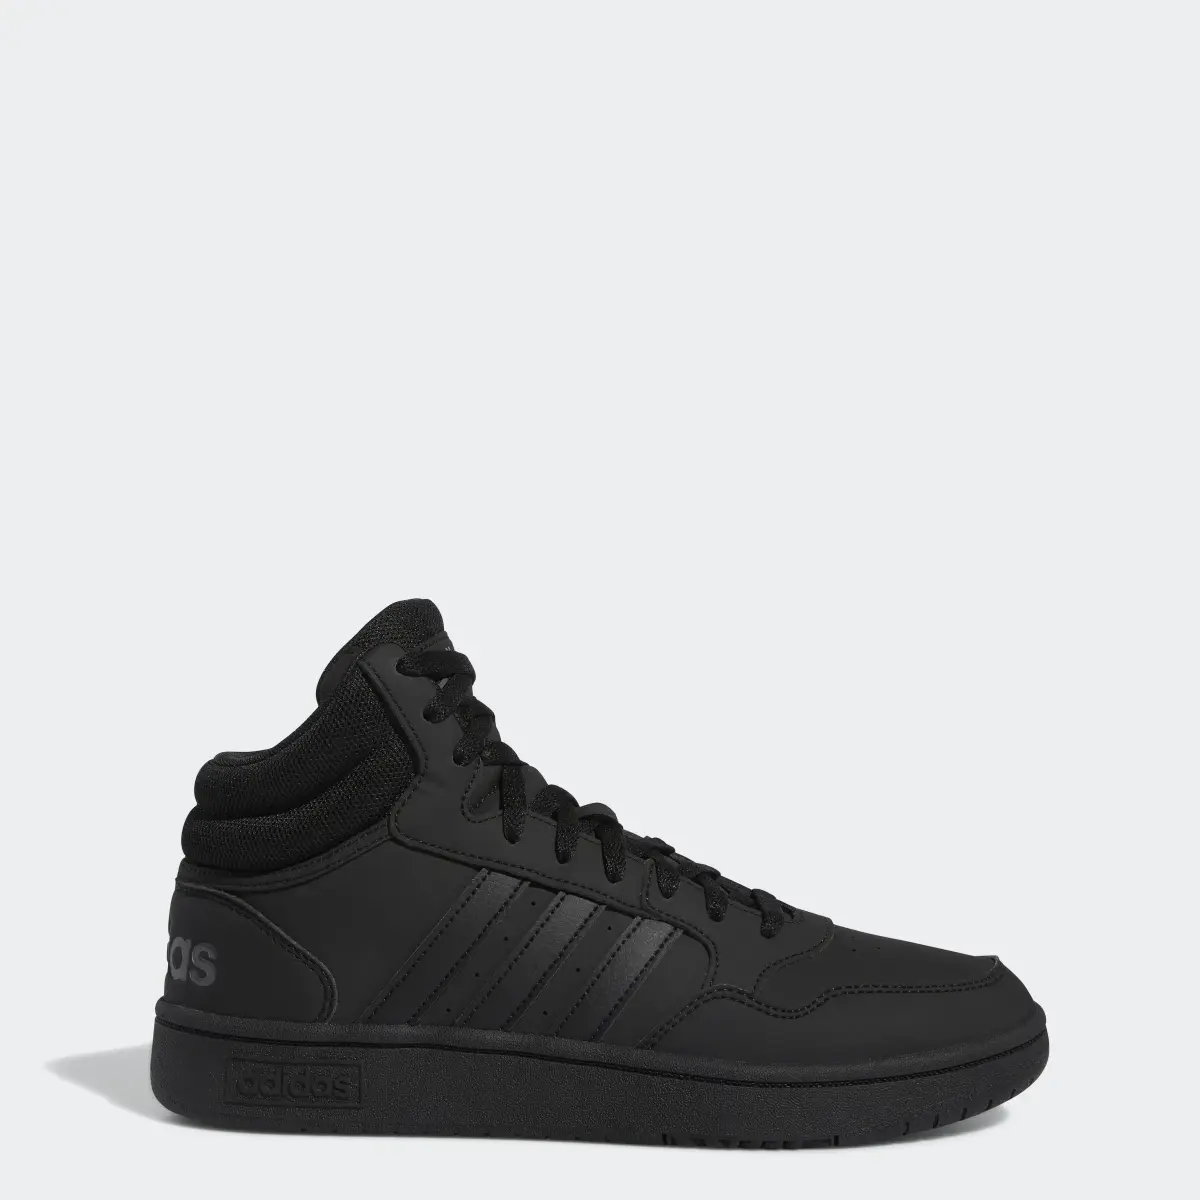 Adidas Hoops 3 Mid Lifestyle Basketball Mid Classic Shoes. 1